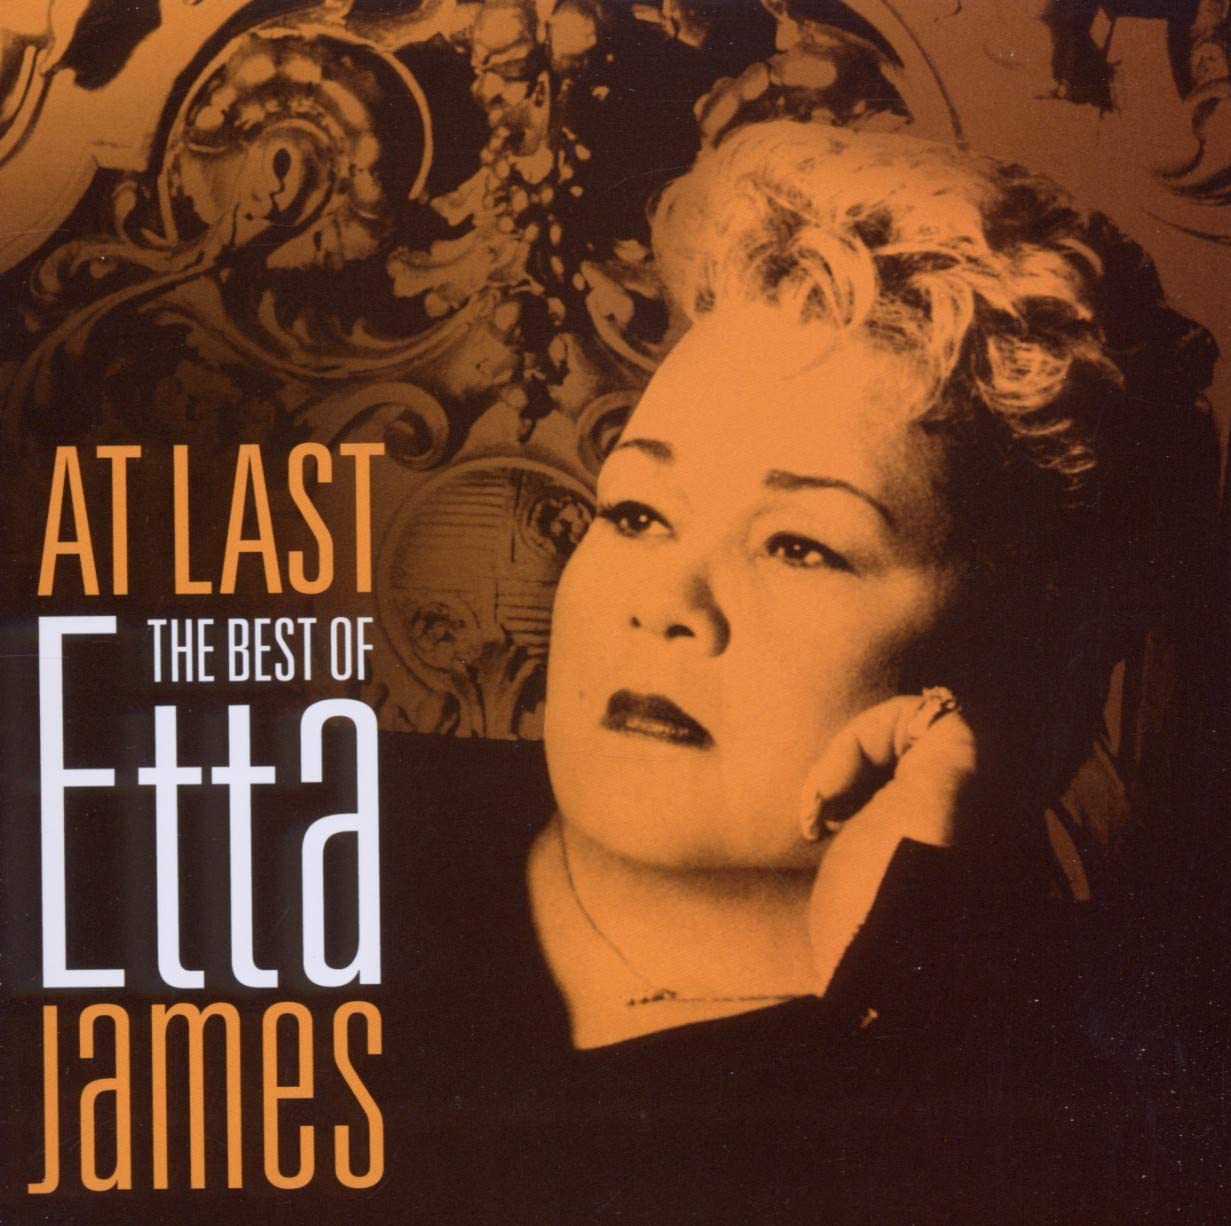 Etta James - At Last The Best Of - CD